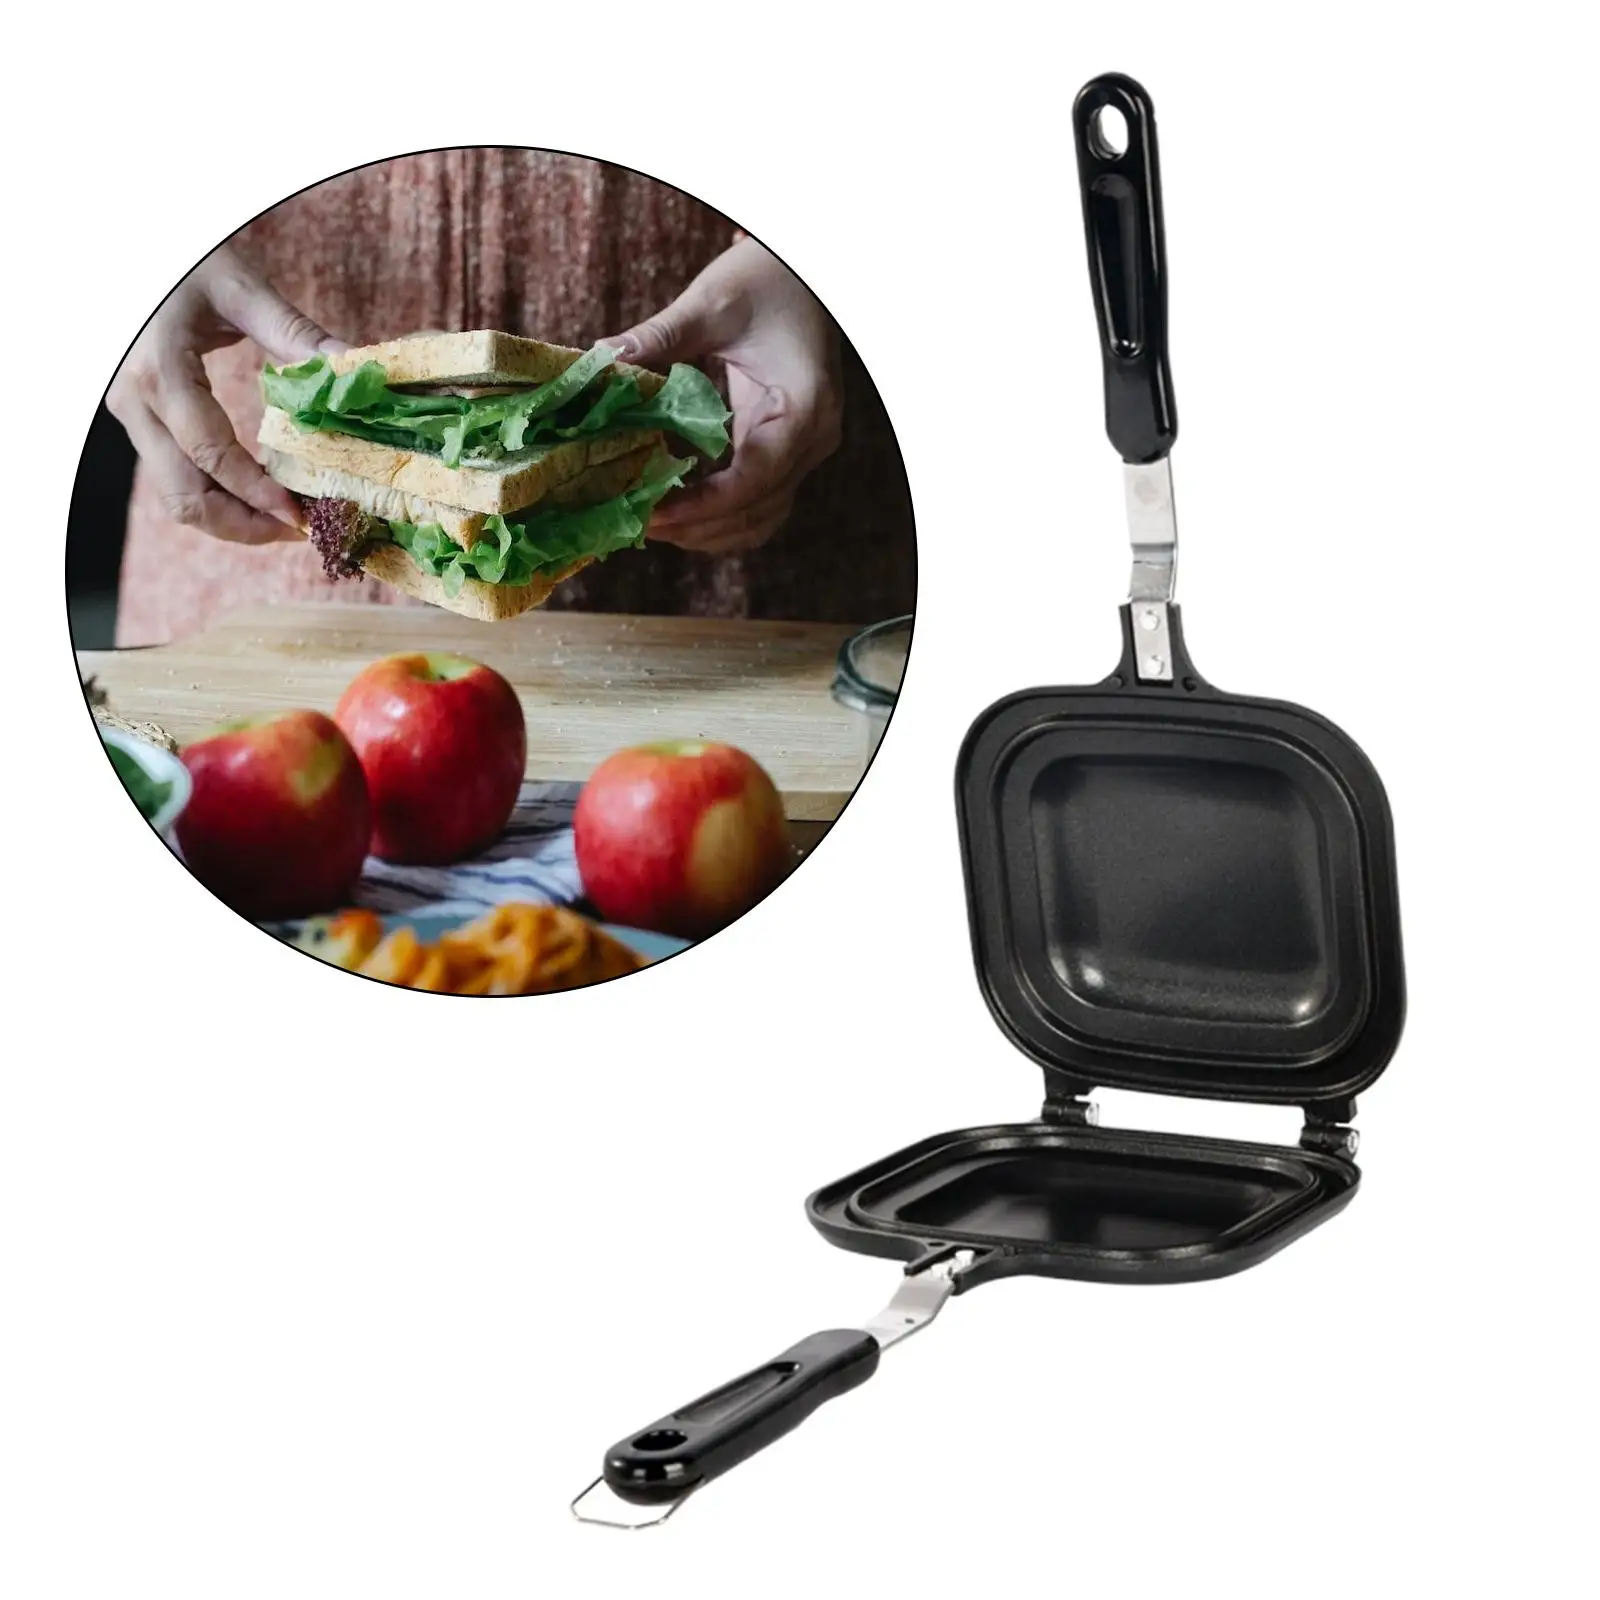 Bread Toast Maker Non Stick Coating Double Sided Heating with Handle Cookware Sandwiches Maker for Stove Top Induction Cooker